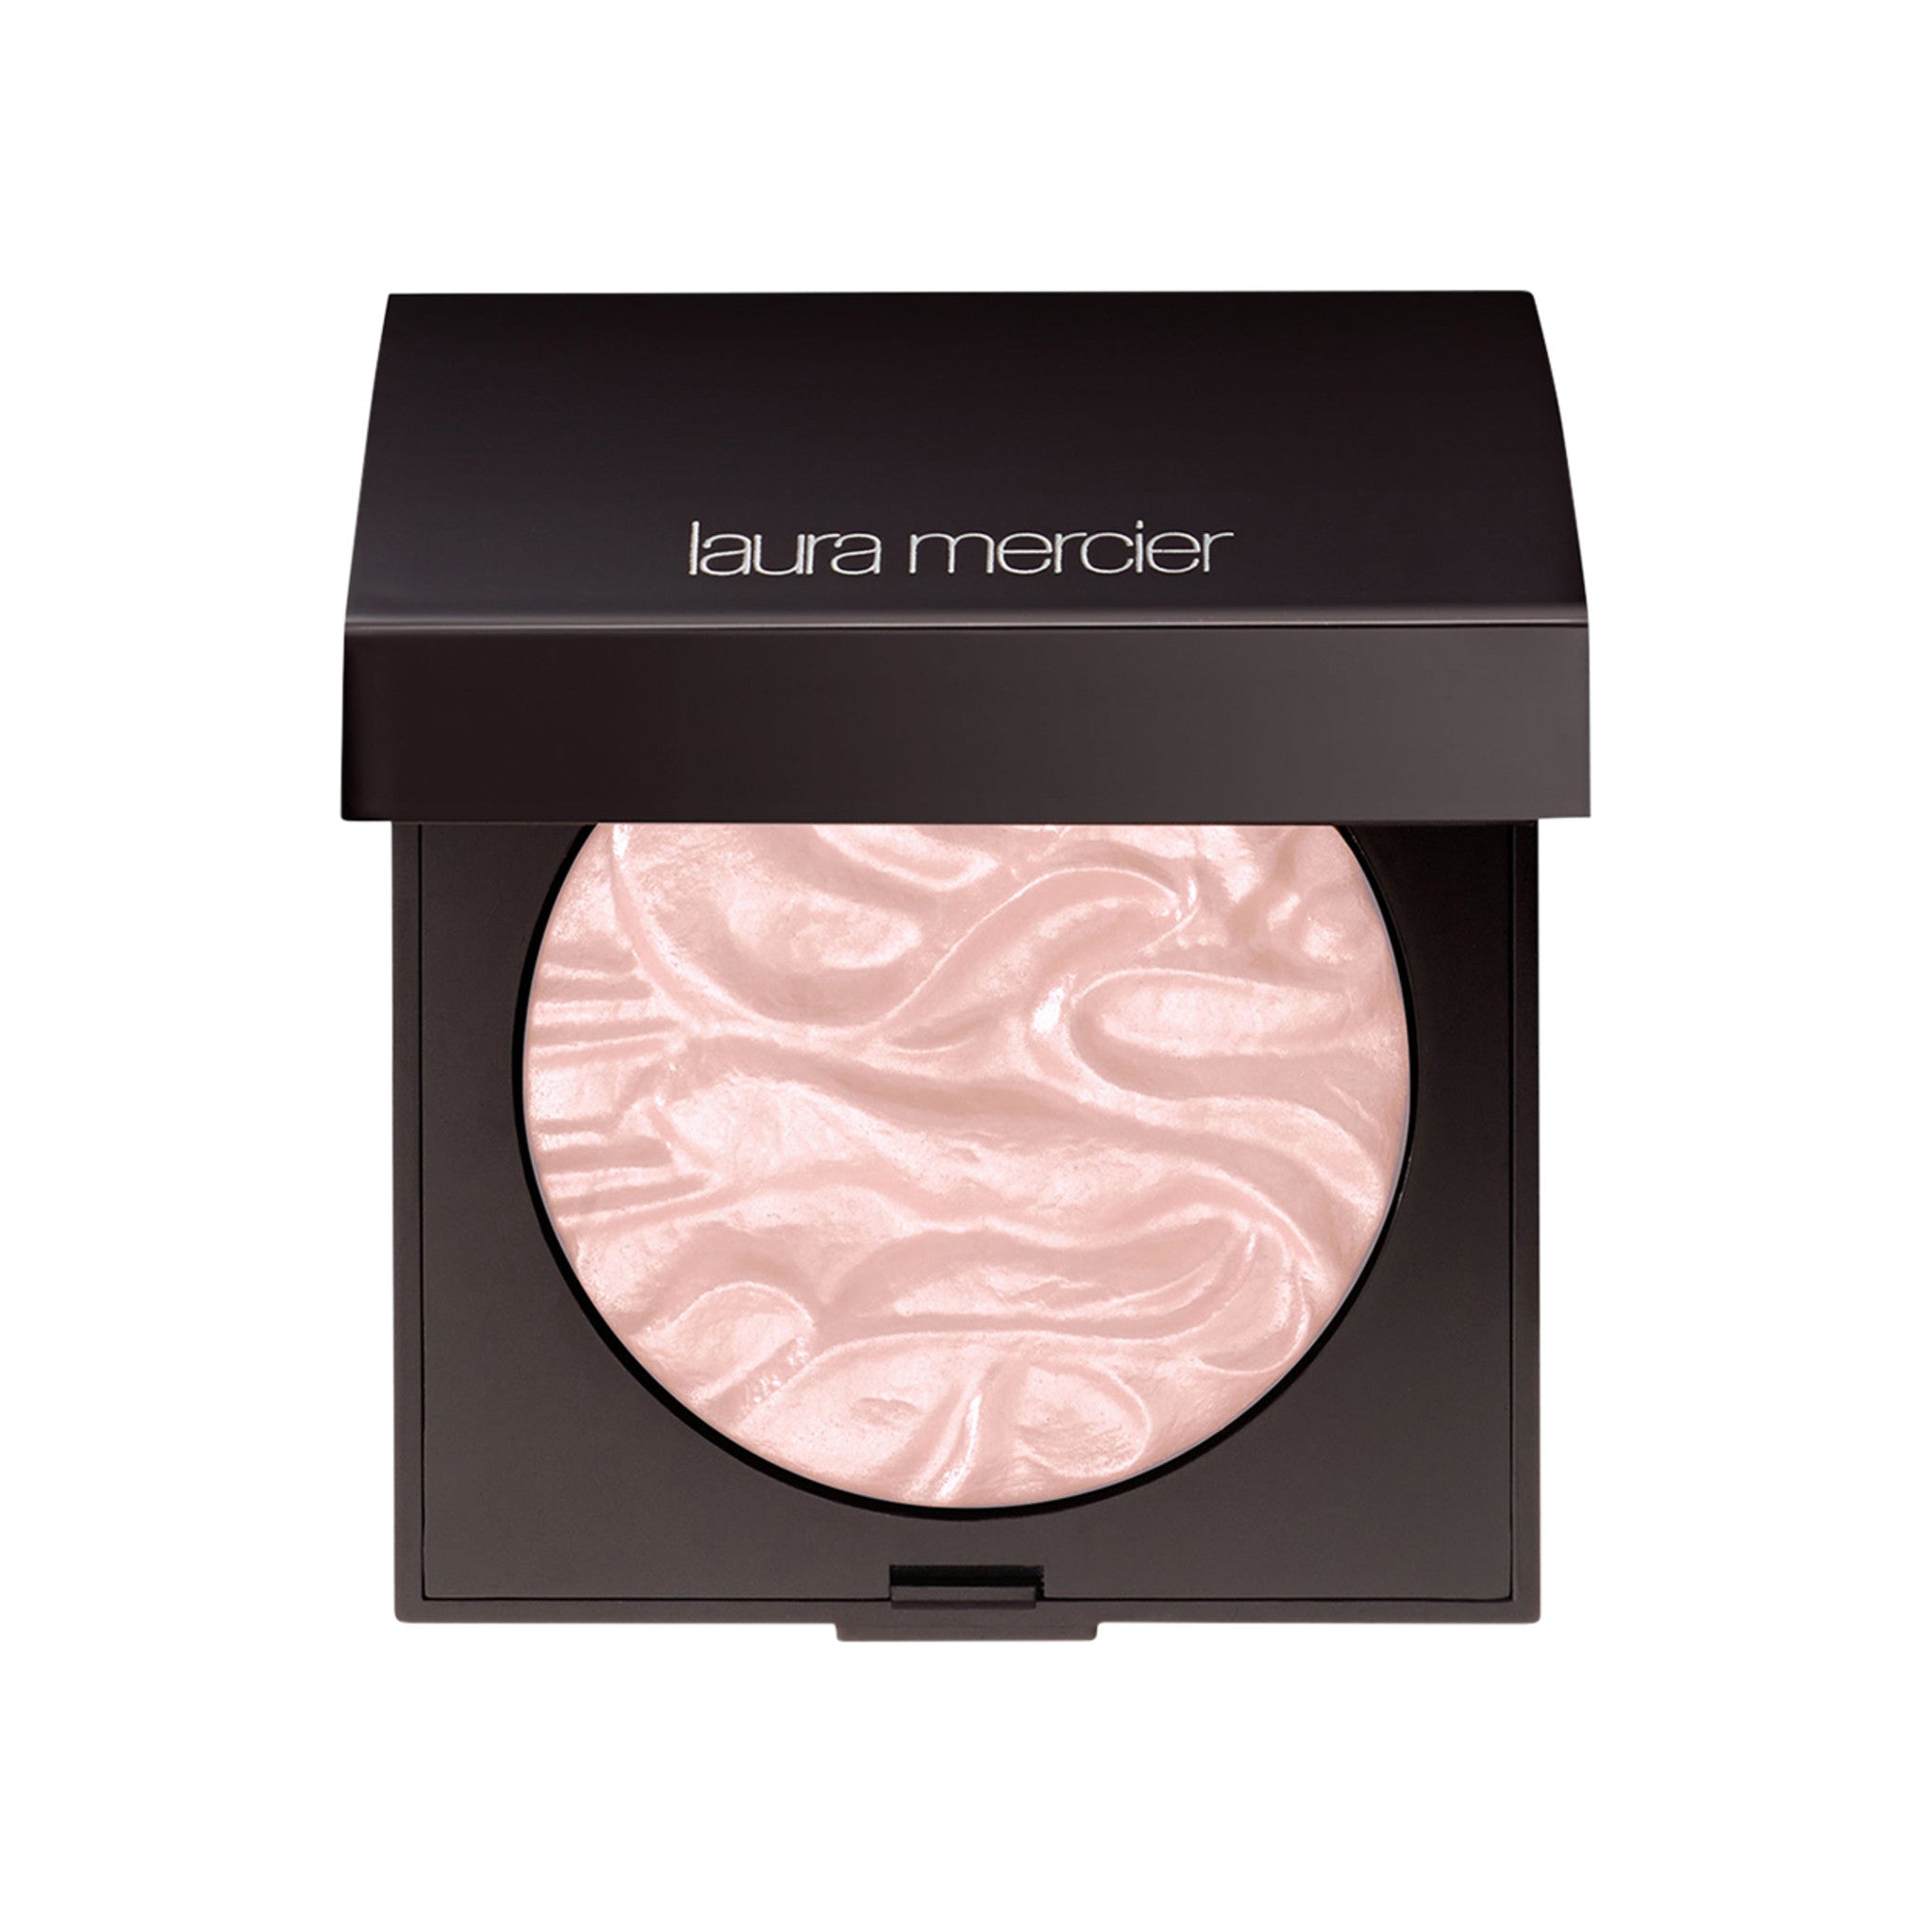 Laura Mercier Face Illuminator Color/Shade variant: Devotion main image. This product is in the color pink